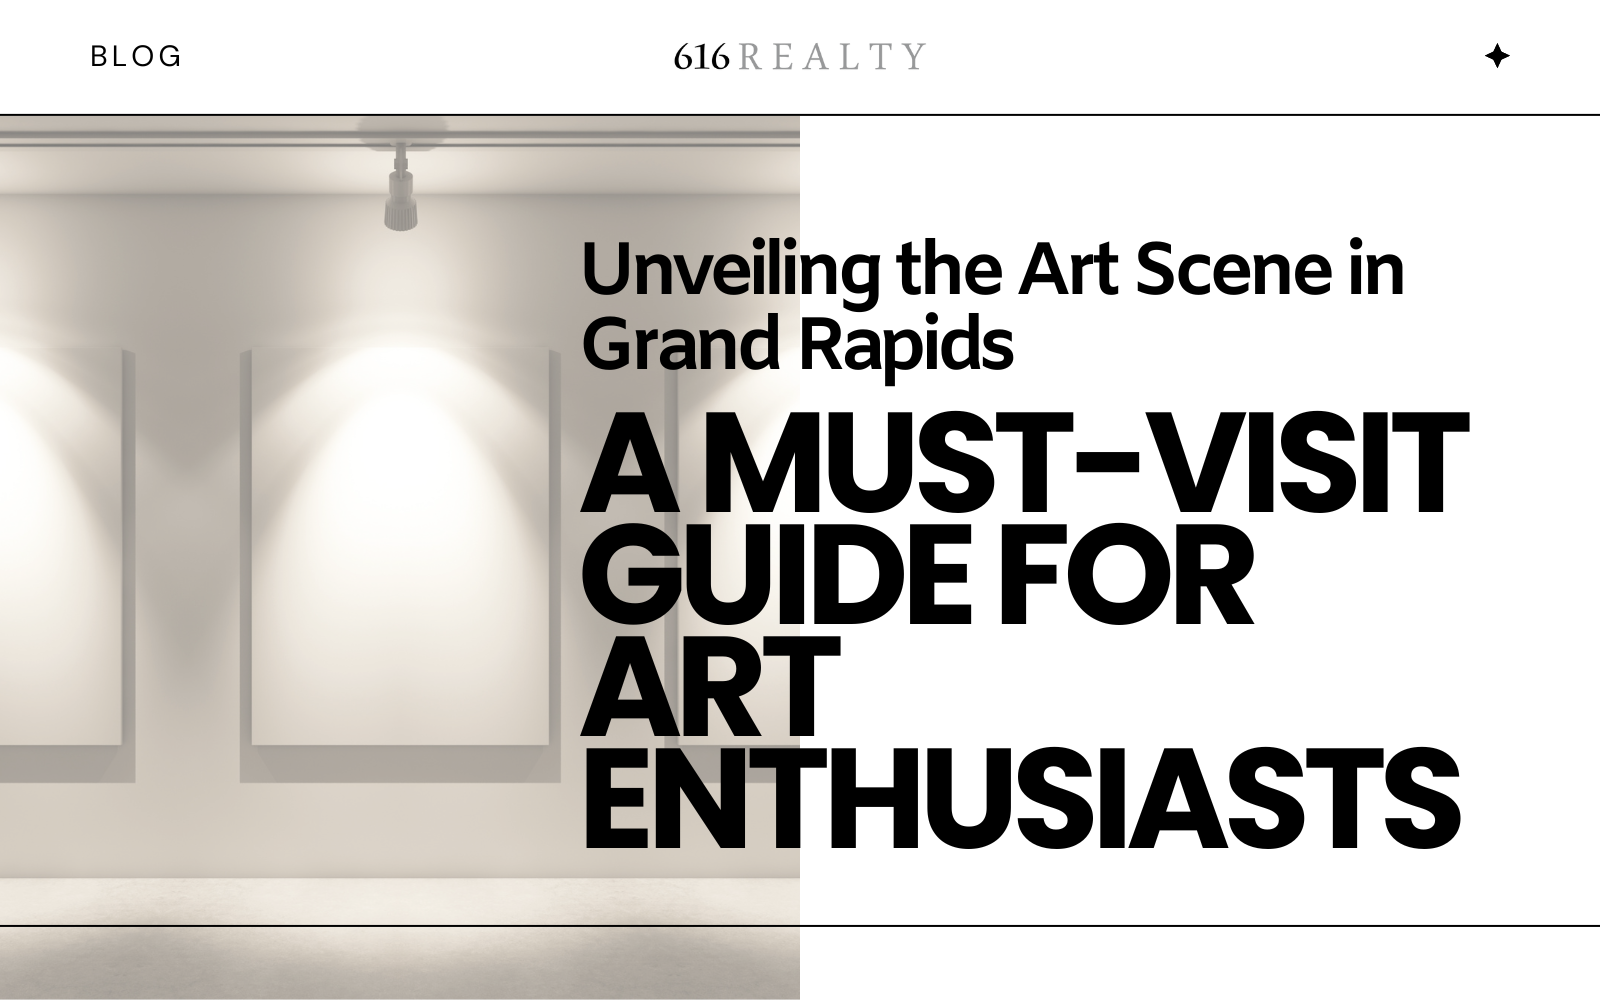 Grand Rapids - A Must-Visit Guide for Art Enthusiasts